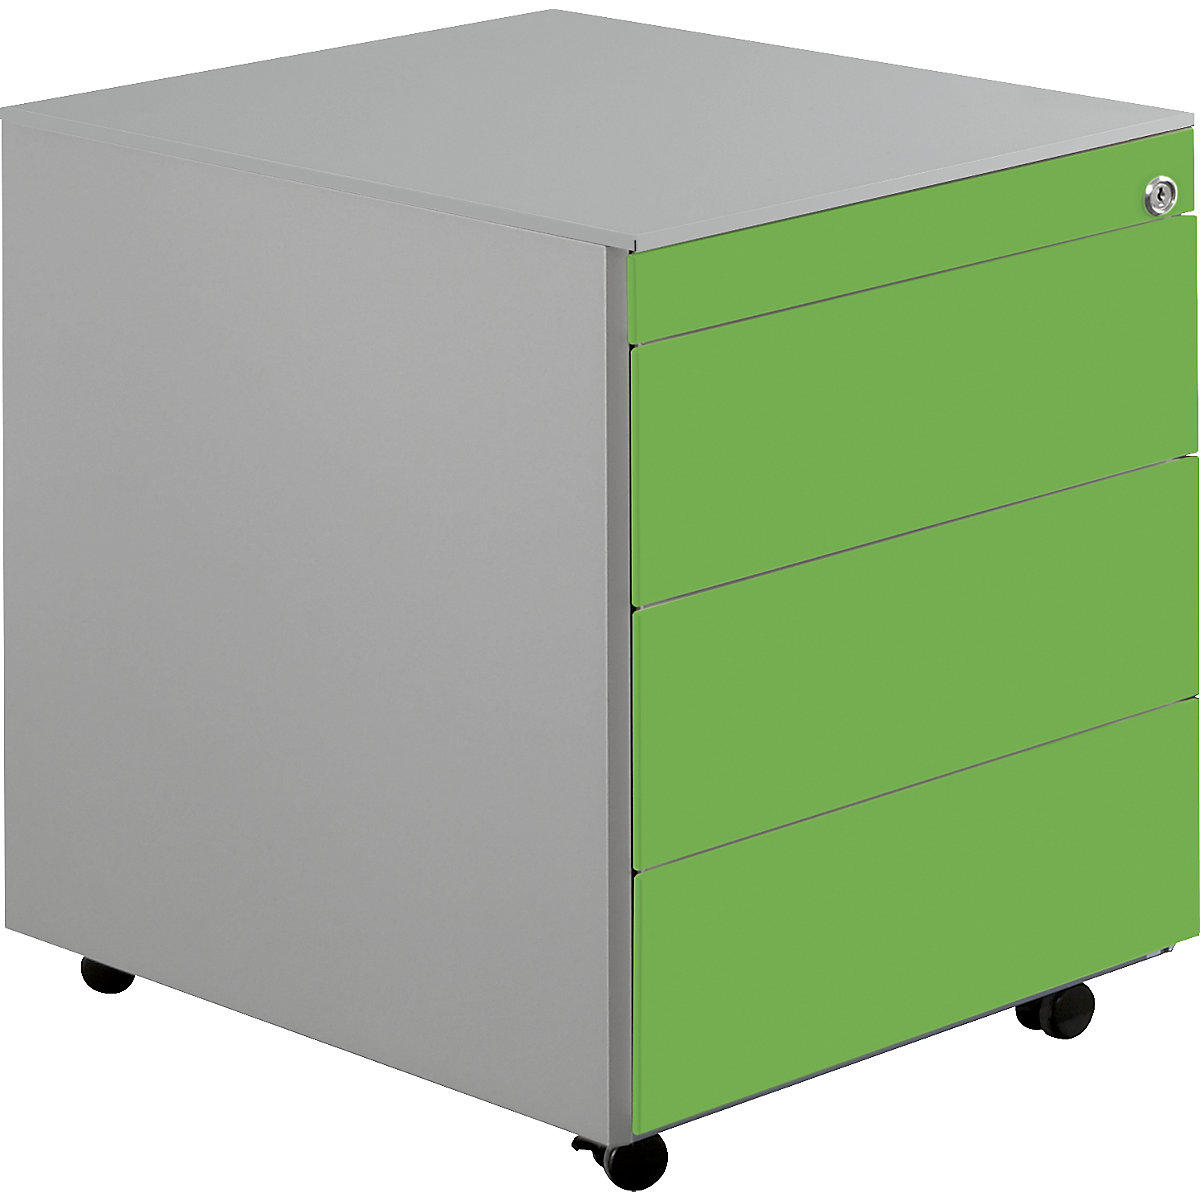 Drawer pedestal with castors – mauser, HxD 570 x 600 mm, steel top, 3 drawers, white aluminium / yellow green-7